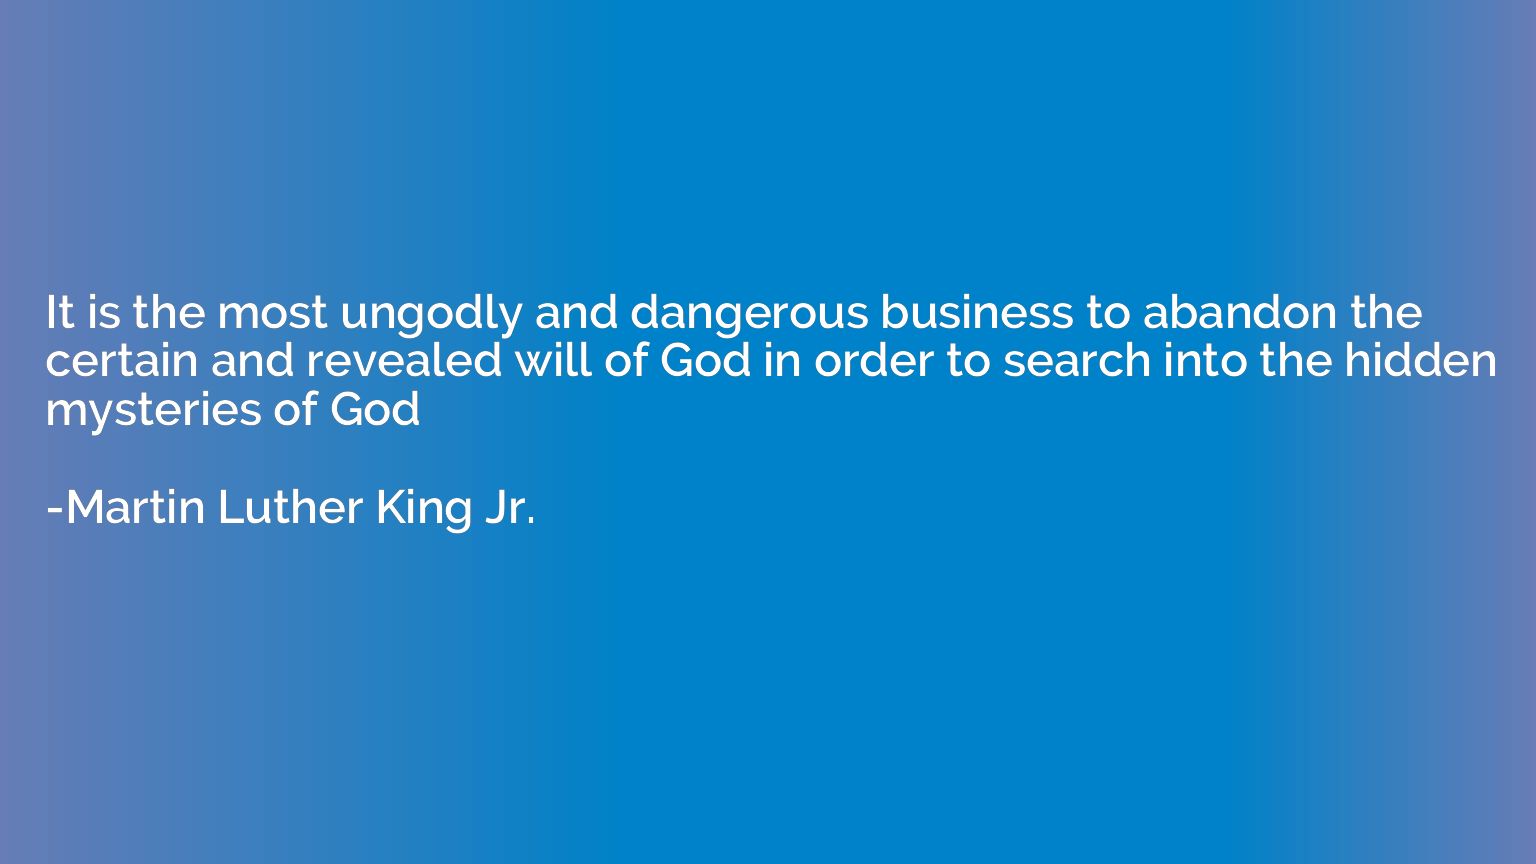 It is the most ungodly and dangerous business to abandon the